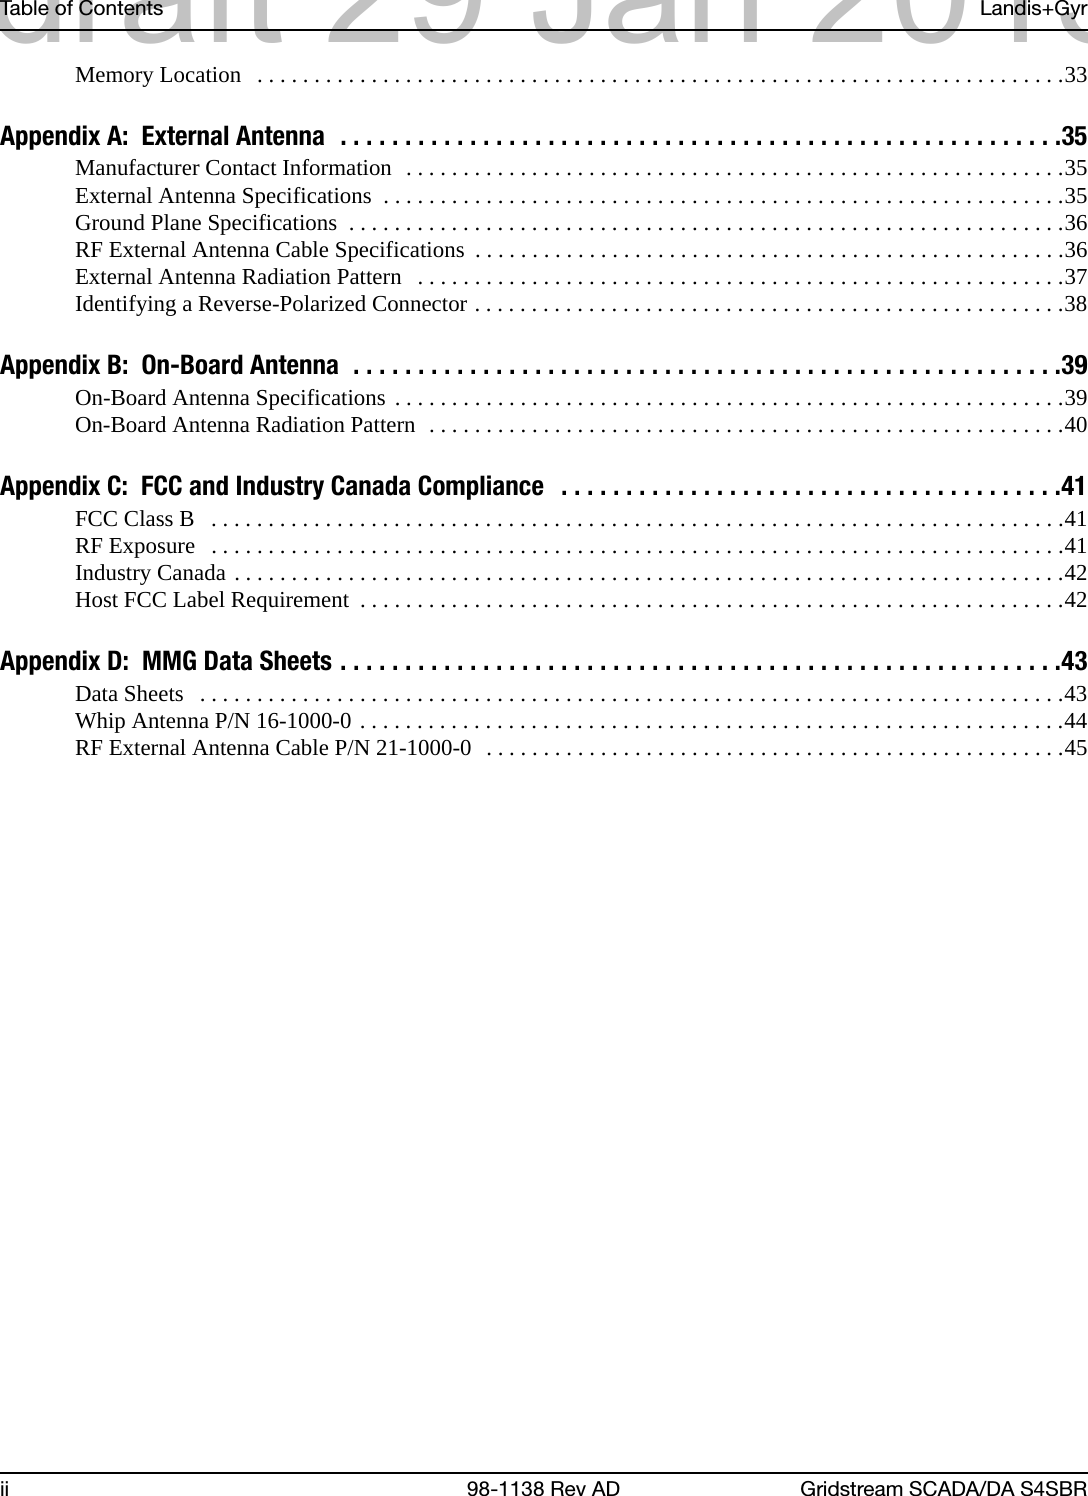 Table of Contents Landis+Gyrii 98-1138 Rev AD Gridstream SCADA/DA S4SBRMemory Location   . . . . . . . . . . . . . . . . . . . . . . . . . . . . . . . . . . . . . . . . . . . . . . . . . . . . . . . . . . . . . . . . . . . . . . .33Appendix A:  External Antenna  . . . . . . . . . . . . . . . . . . . . . . . . . . . . . . . . . . . . . . . . . . . . . . . . . . . . . . . .35Manufacturer Contact Information  . . . . . . . . . . . . . . . . . . . . . . . . . . . . . . . . . . . . . . . . . . . . . . . . . . . . . . . . . .35External Antenna Specifications  . . . . . . . . . . . . . . . . . . . . . . . . . . . . . . . . . . . . . . . . . . . . . . . . . . . . . . . . . . . .35Ground Plane Specifications  . . . . . . . . . . . . . . . . . . . . . . . . . . . . . . . . . . . . . . . . . . . . . . . . . . . . . . . . . . . . . . .36RF External Antenna Cable Specifications  . . . . . . . . . . . . . . . . . . . . . . . . . . . . . . . . . . . . . . . . . . . . . . . . . . . .36External Antenna Radiation Pattern   . . . . . . . . . . . . . . . . . . . . . . . . . . . . . . . . . . . . . . . . . . . . . . . . . . . . . . . . .37Identifying a Reverse-Polarized Connector . . . . . . . . . . . . . . . . . . . . . . . . . . . . . . . . . . . . . . . . . . . . . . . . . . . .38Appendix B:  On-Board Antenna  . . . . . . . . . . . . . . . . . . . . . . . . . . . . . . . . . . . . . . . . . . . . . . . . . . . . . . .39On-Board Antenna Specifications . . . . . . . . . . . . . . . . . . . . . . . . . . . . . . . . . . . . . . . . . . . . . . . . . . . . . . . . . . .39On-Board Antenna Radiation Pattern  . . . . . . . . . . . . . . . . . . . . . . . . . . . . . . . . . . . . . . . . . . . . . . . . . . . . . . . .40Appendix C:  FCC and Industry Canada Compliance   . . . . . . . . . . . . . . . . . . . . . . . . . . . . . . . . . . . . . . .41FCC Class B   . . . . . . . . . . . . . . . . . . . . . . . . . . . . . . . . . . . . . . . . . . . . . . . . . . . . . . . . . . . . . . . . . . . . . . . . . . .41RF Exposure   . . . . . . . . . . . . . . . . . . . . . . . . . . . . . . . . . . . . . . . . . . . . . . . . . . . . . . . . . . . . . . . . . . . . . . . . . . .41Industry Canada . . . . . . . . . . . . . . . . . . . . . . . . . . . . . . . . . . . . . . . . . . . . . . . . . . . . . . . . . . . . . . . . . . . . . . . . .42Host FCC Label Requirement  . . . . . . . . . . . . . . . . . . . . . . . . . . . . . . . . . . . . . . . . . . . . . . . . . . . . . . . . . . . . . .42Appendix D:  MMG Data Sheets . . . . . . . . . . . . . . . . . . . . . . . . . . . . . . . . . . . . . . . . . . . . . . . . . . . . . . . .43Data Sheets   . . . . . . . . . . . . . . . . . . . . . . . . . . . . . . . . . . . . . . . . . . . . . . . . . . . . . . . . . . . . . . . . . . . . . . . . . . . .43Whip Antenna P/N 16-1000-0 . . . . . . . . . . . . . . . . . . . . . . . . . . . . . . . . . . . . . . . . . . . . . . . . . . . . . . . . . . . . . .44RF External Antenna Cable P/N 21-1000-0  . . . . . . . . . . . . . . . . . . . . . . . . . . . . . . . . . . . . . . . . . . . . . . . . . . .45draft 29 Jan 2013